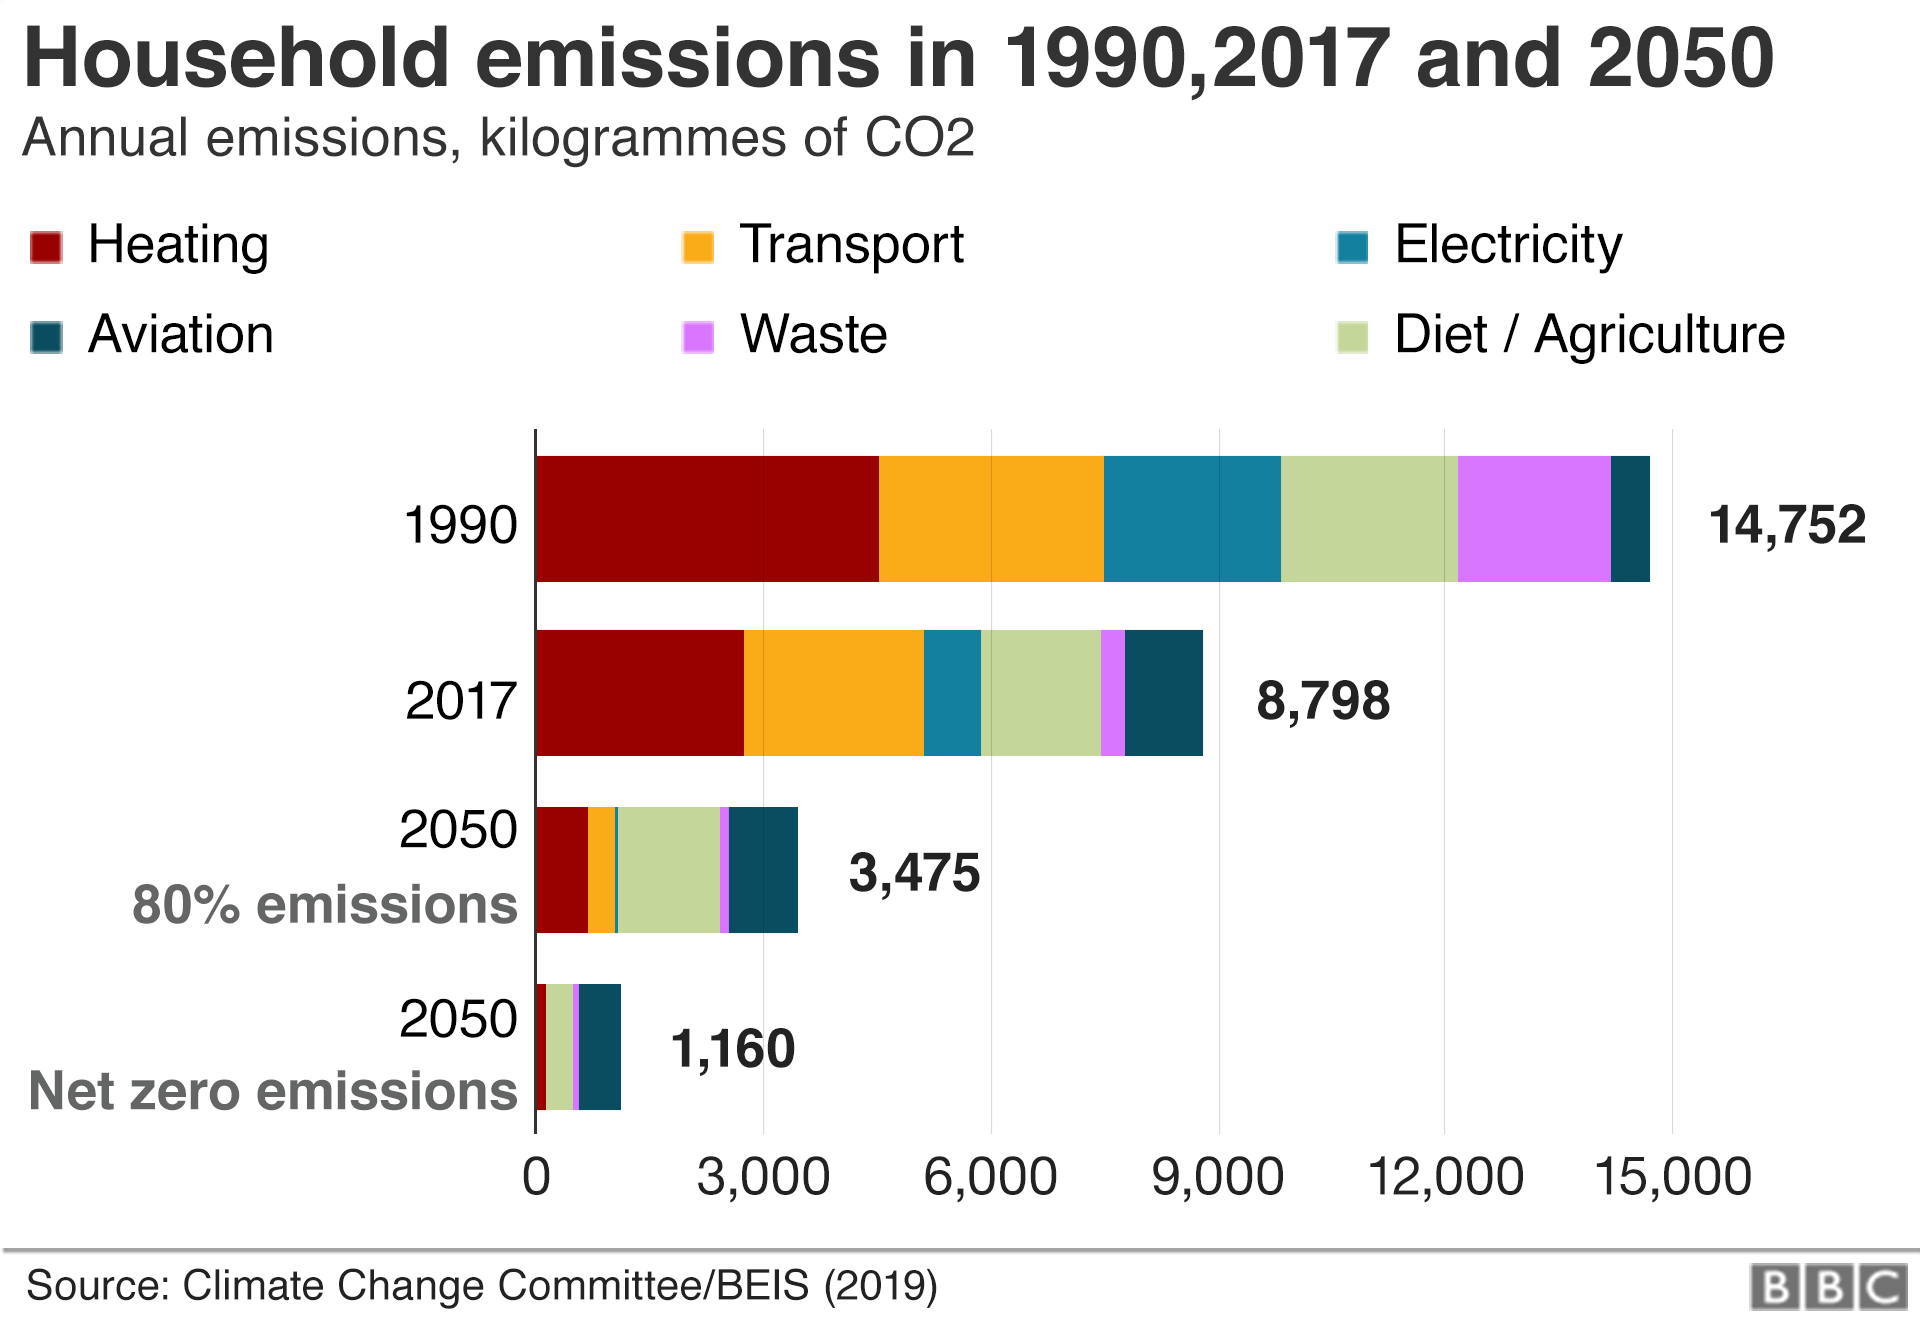 Chart showing the breakdown of household emissions in 1990, 2017 and 2050